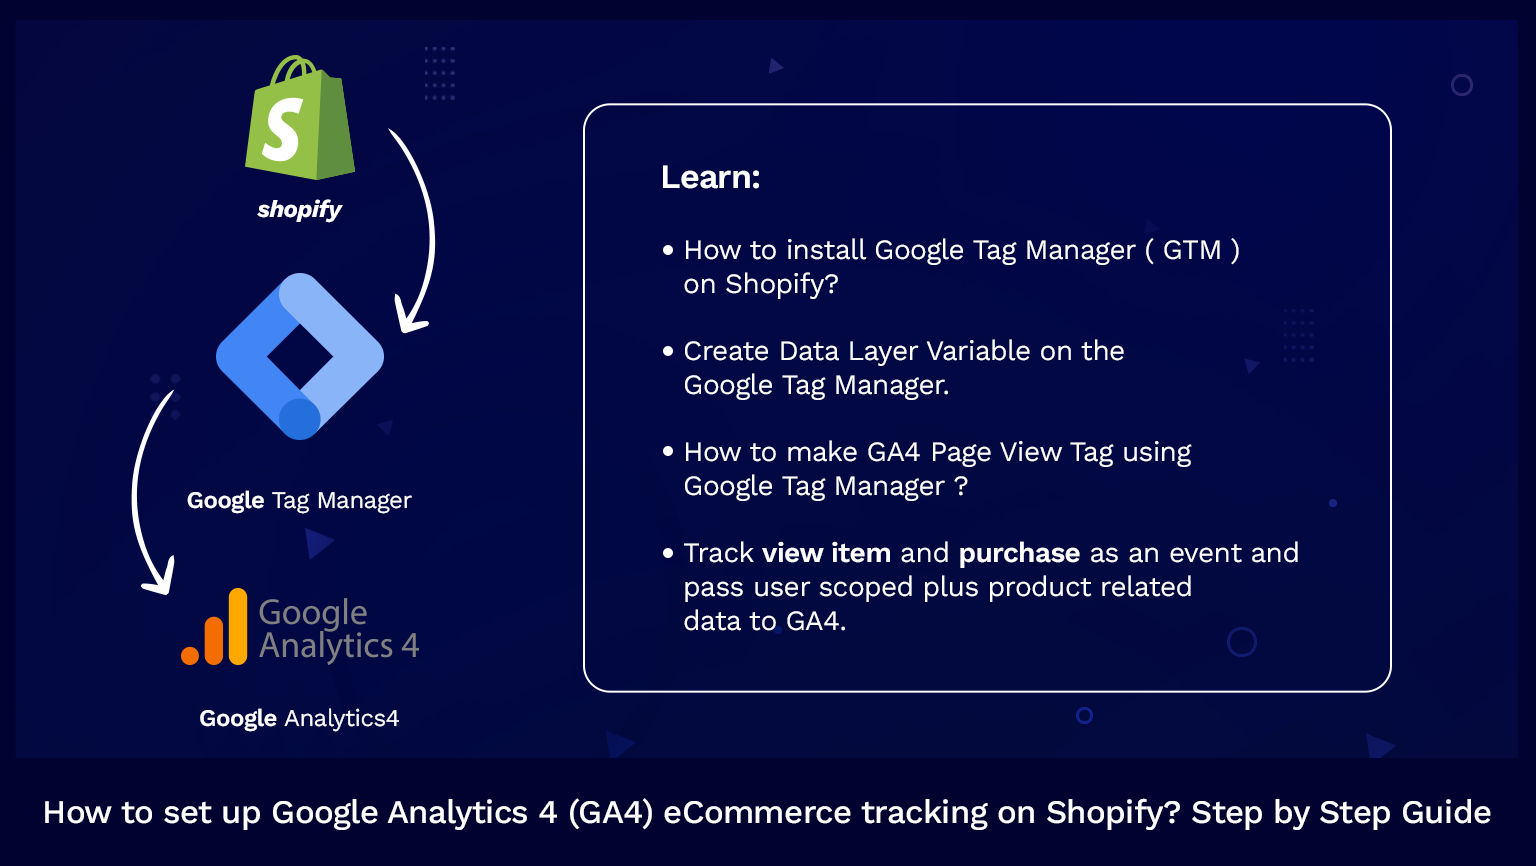 set up GA4 ecommerce tracking on shopify. step by step guide